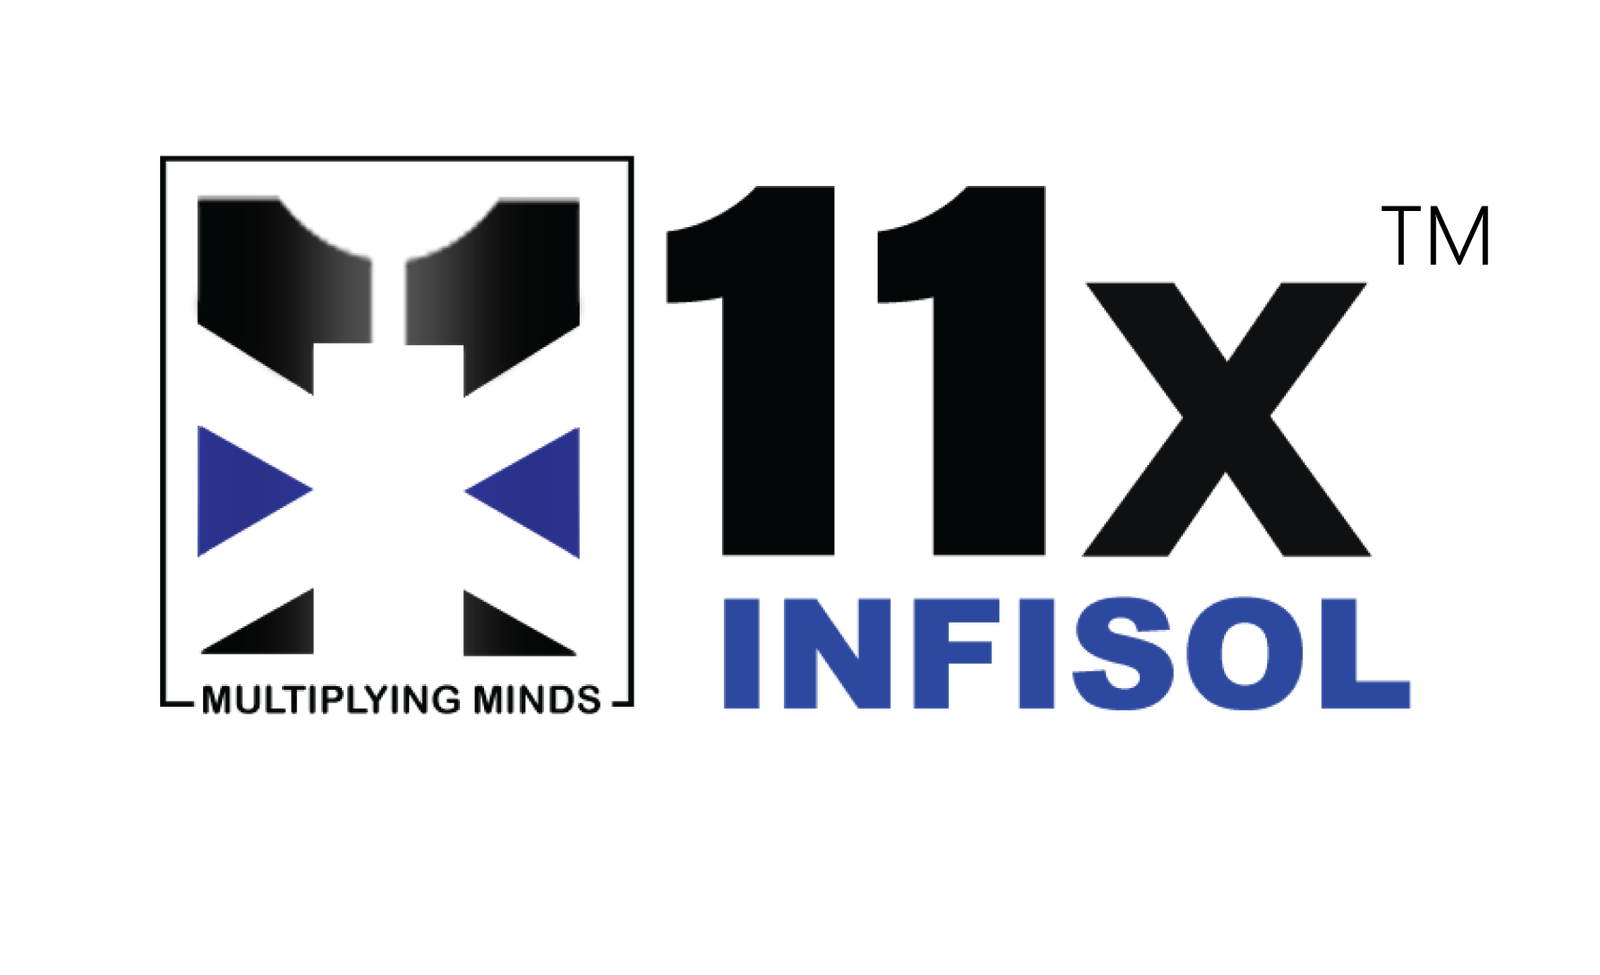 11x INFISOL Private Limited's logo